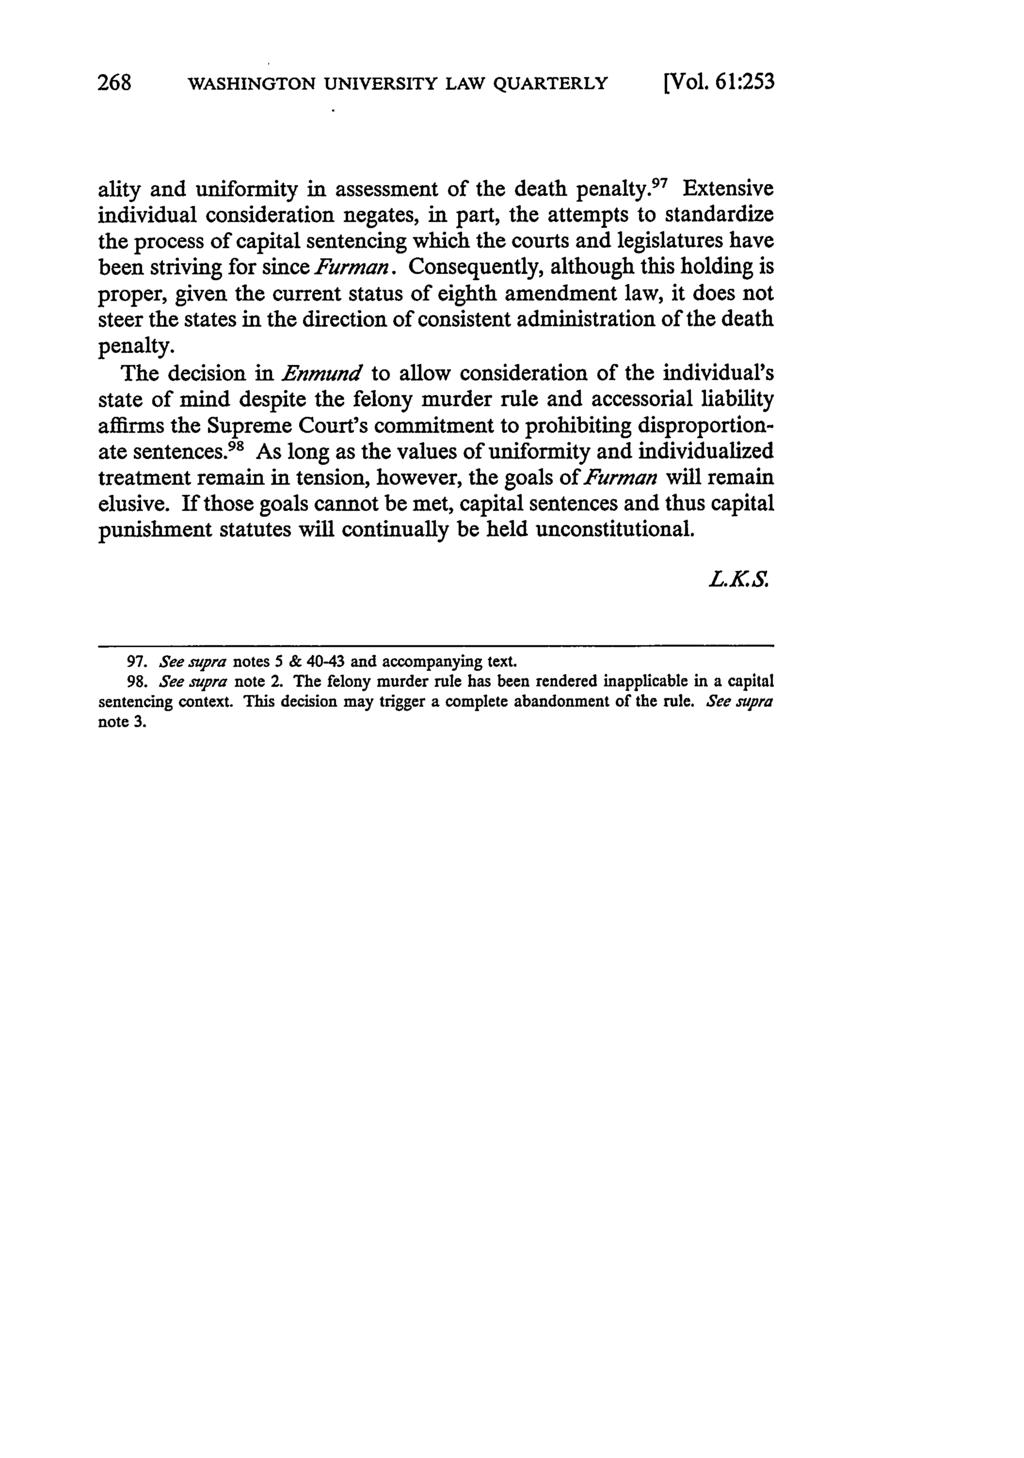 WASHINGTON UNIVERSITY LAW QUARTERLY [Vol. 61:253 ality and uniformity in assessment of the death penalty.